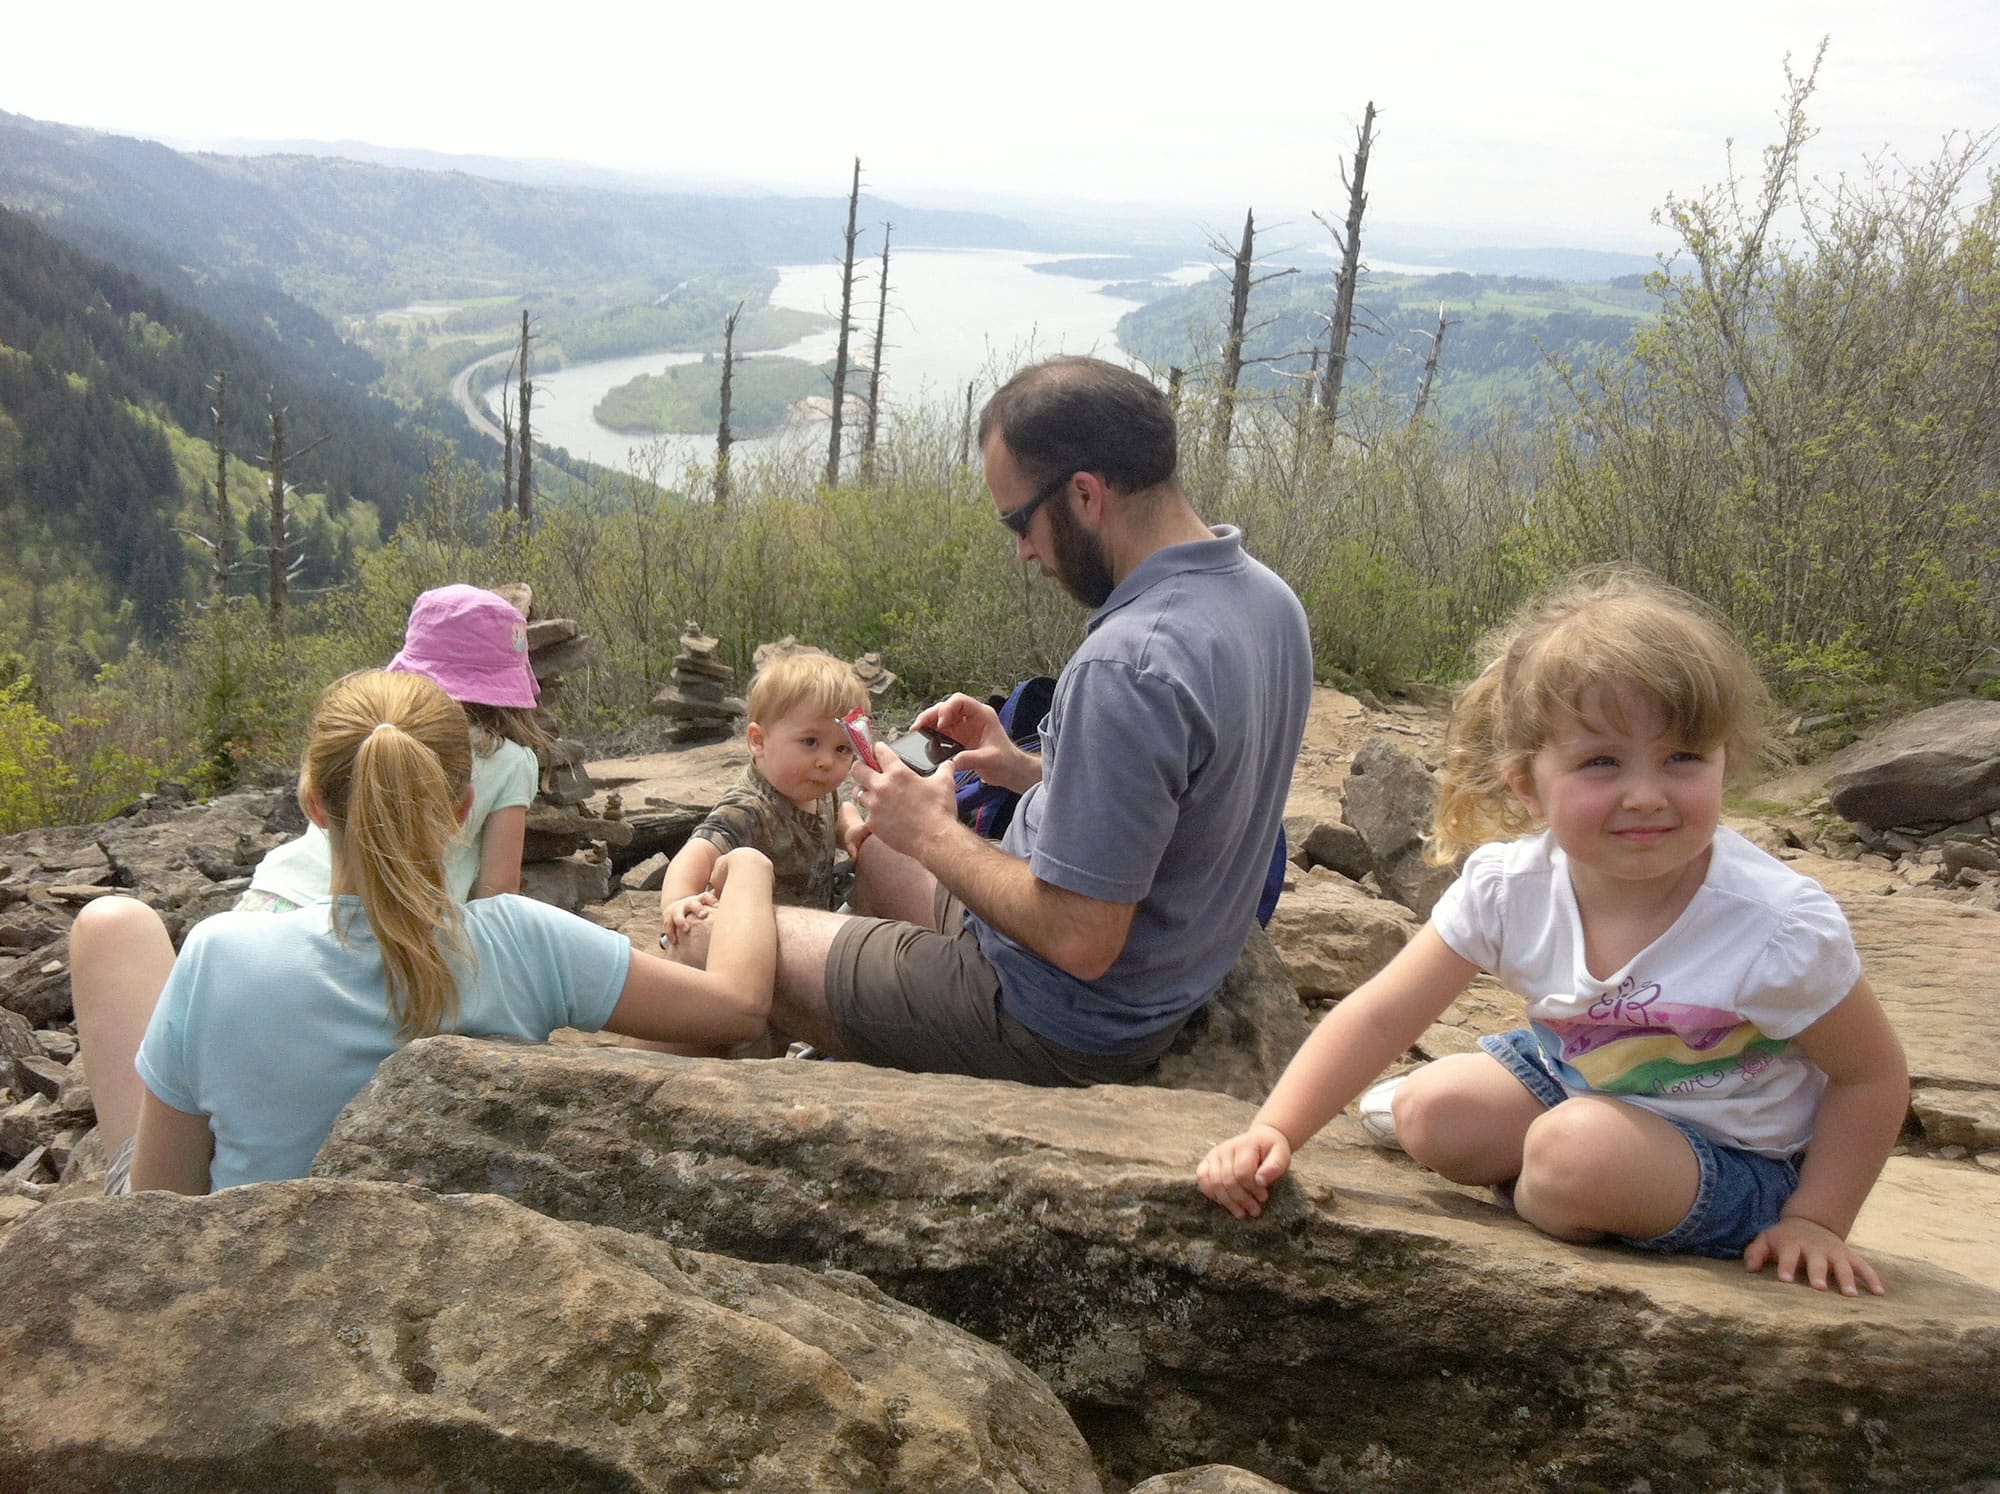 With the Columbia River visible in the distance, the Juhl family of Salem, Ore., parents Ben and Melissa, and Amelia, 5, Reagan, 18 months, and Brielle, 3, take a break near Angel's Rest near Bridal Veil, Ore.